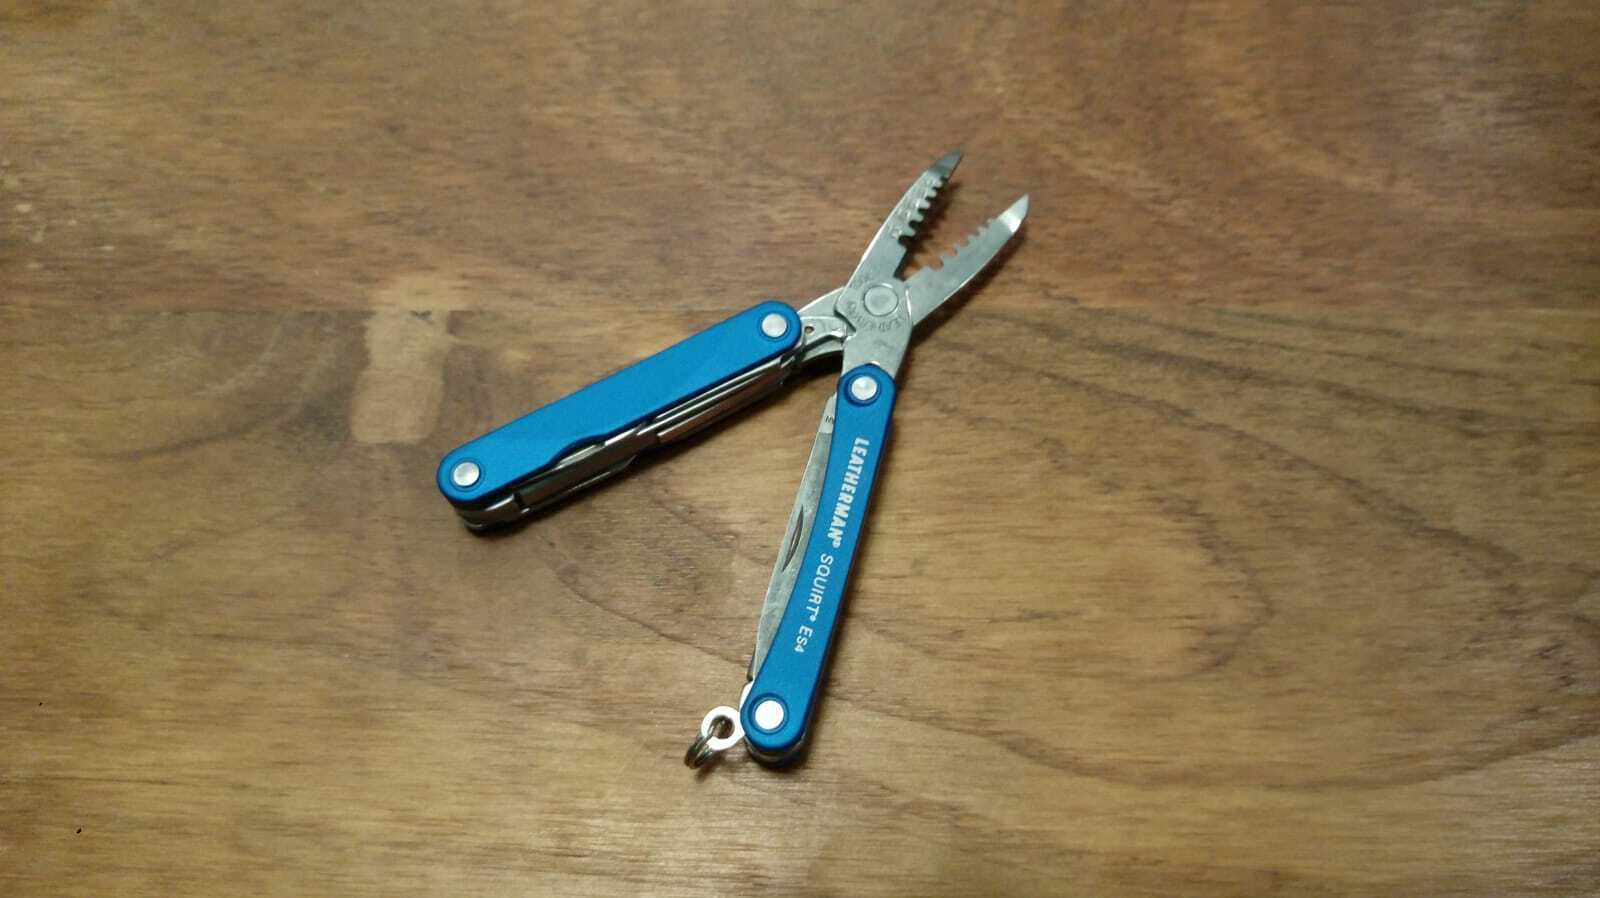 Survival Leatherman Austin Mall - SQUIRT ES4 831242 Multi Printed Baltimore Mall Tools in